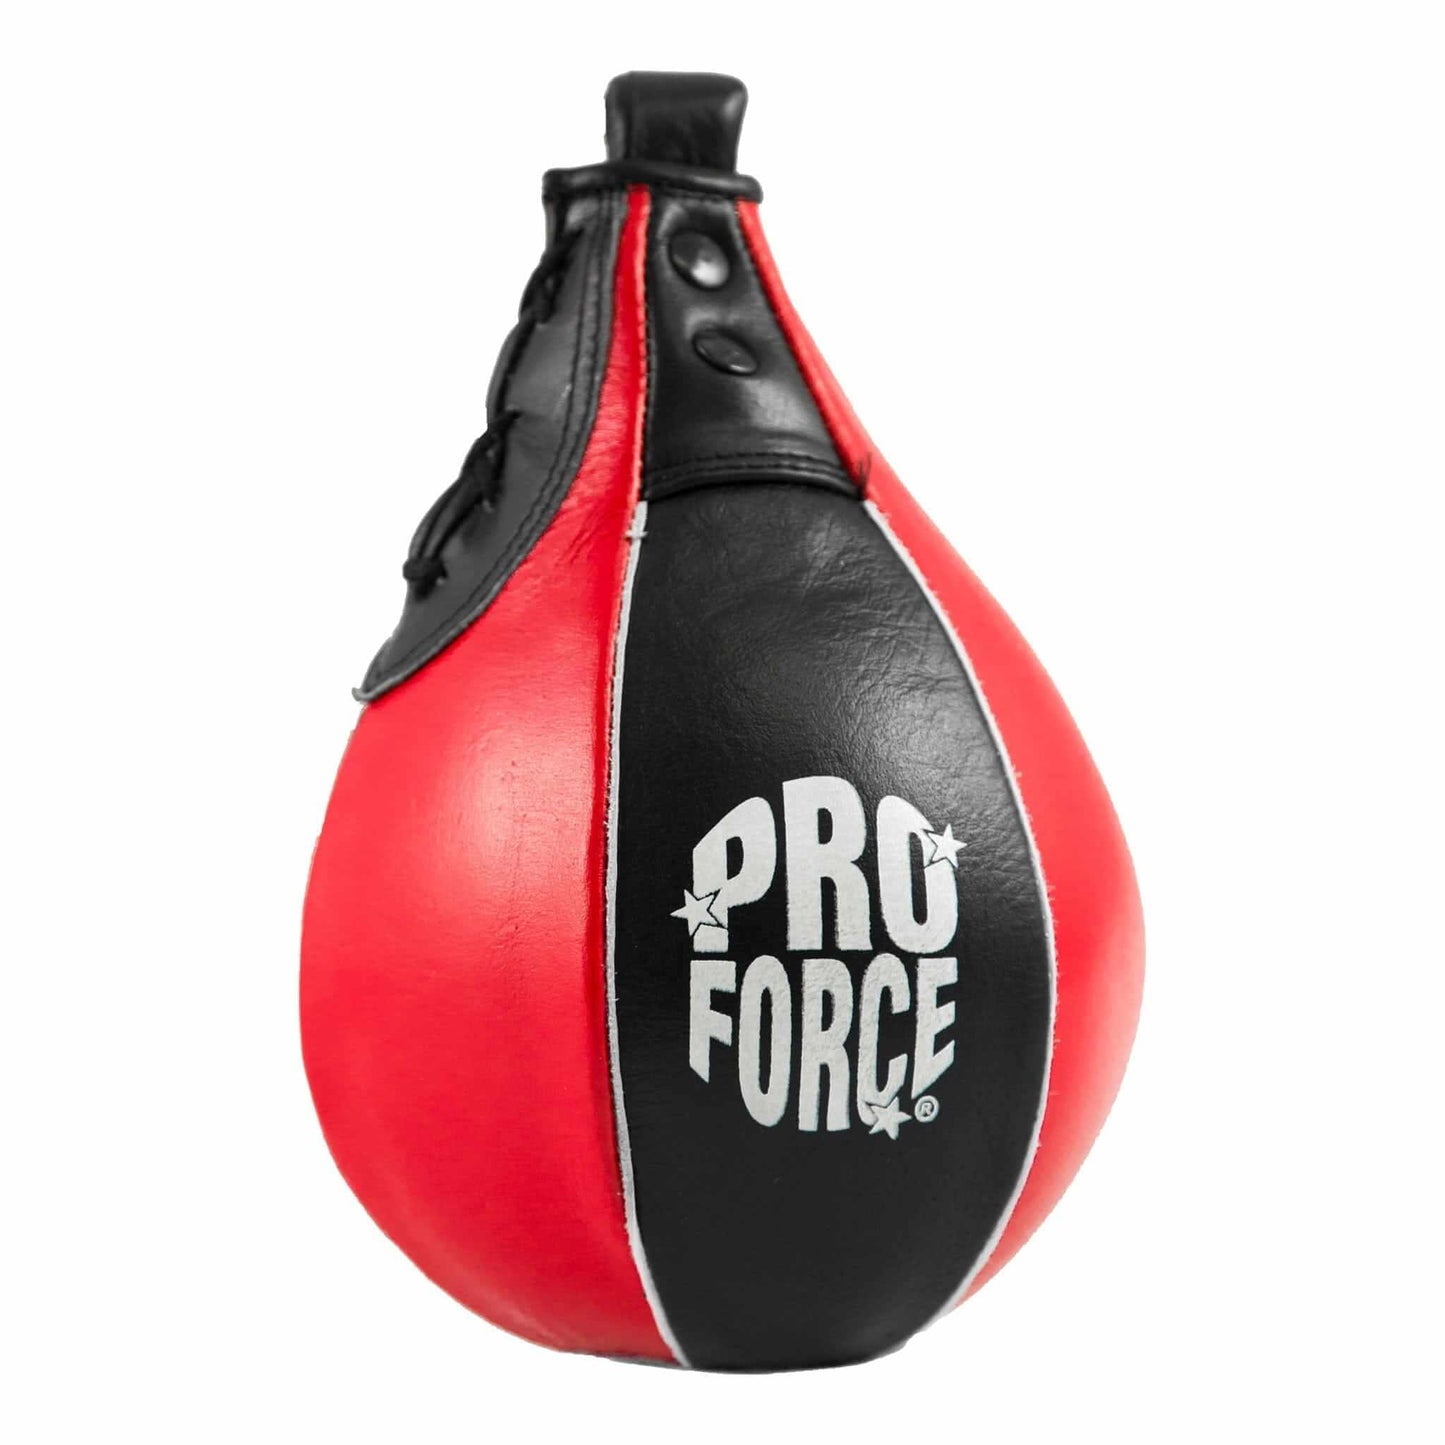 ProForce sporting goods black/red / medium 6x9 ProForce Leather Speed Bag Martial Arts Boxing